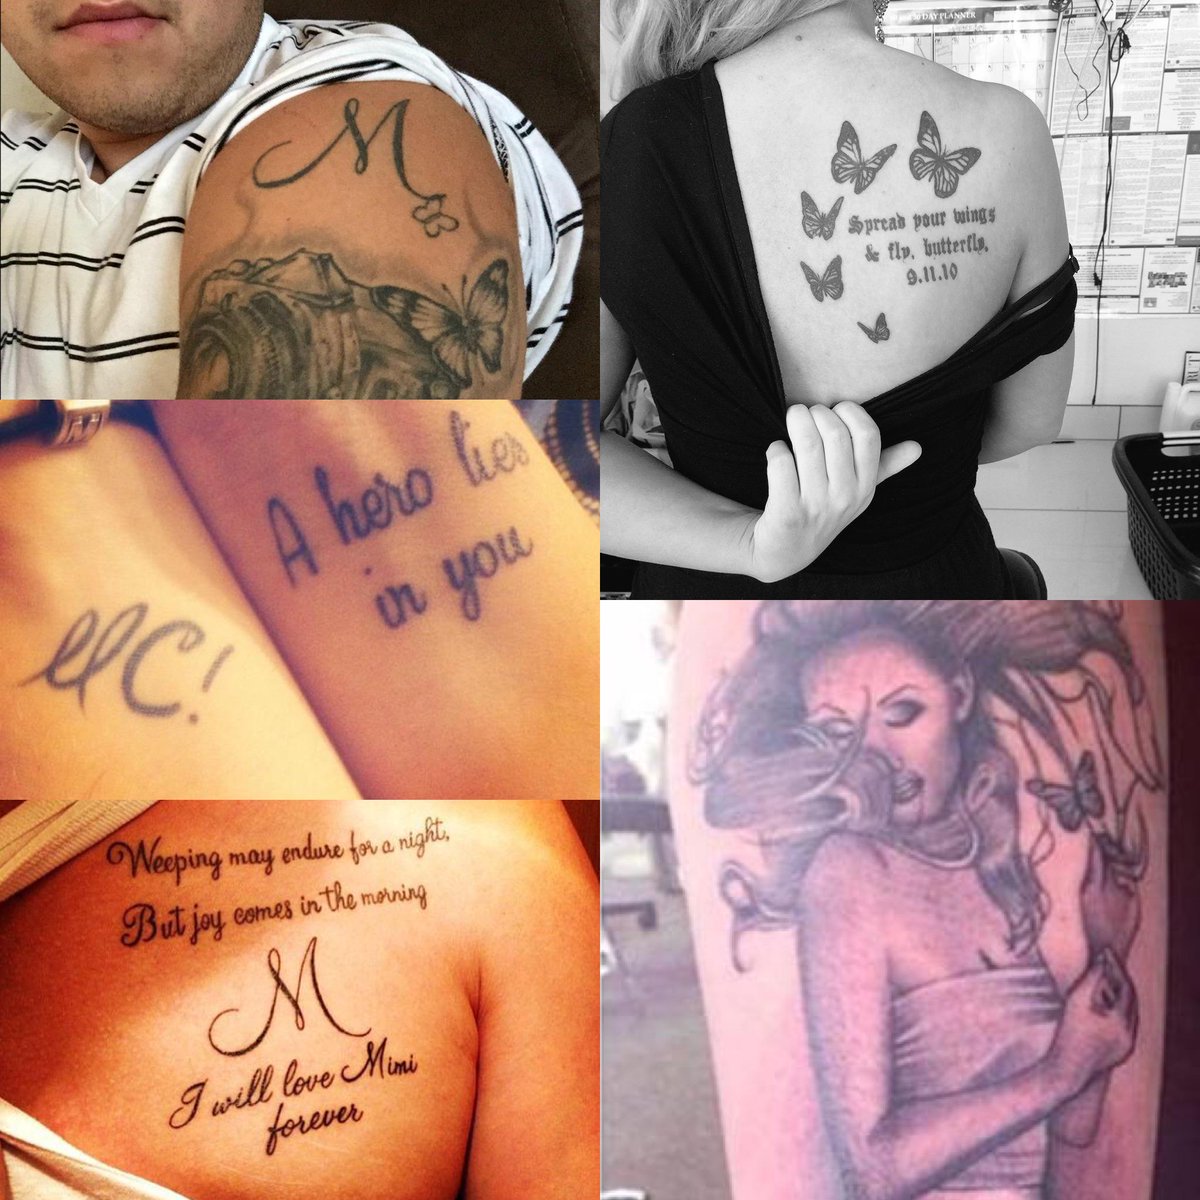 Thanks #Lambs #Lambily for sharing your Tattoos! #MCTattoo #tattootuesday ???????????? http://t.co/RQEfmqJ1Cm